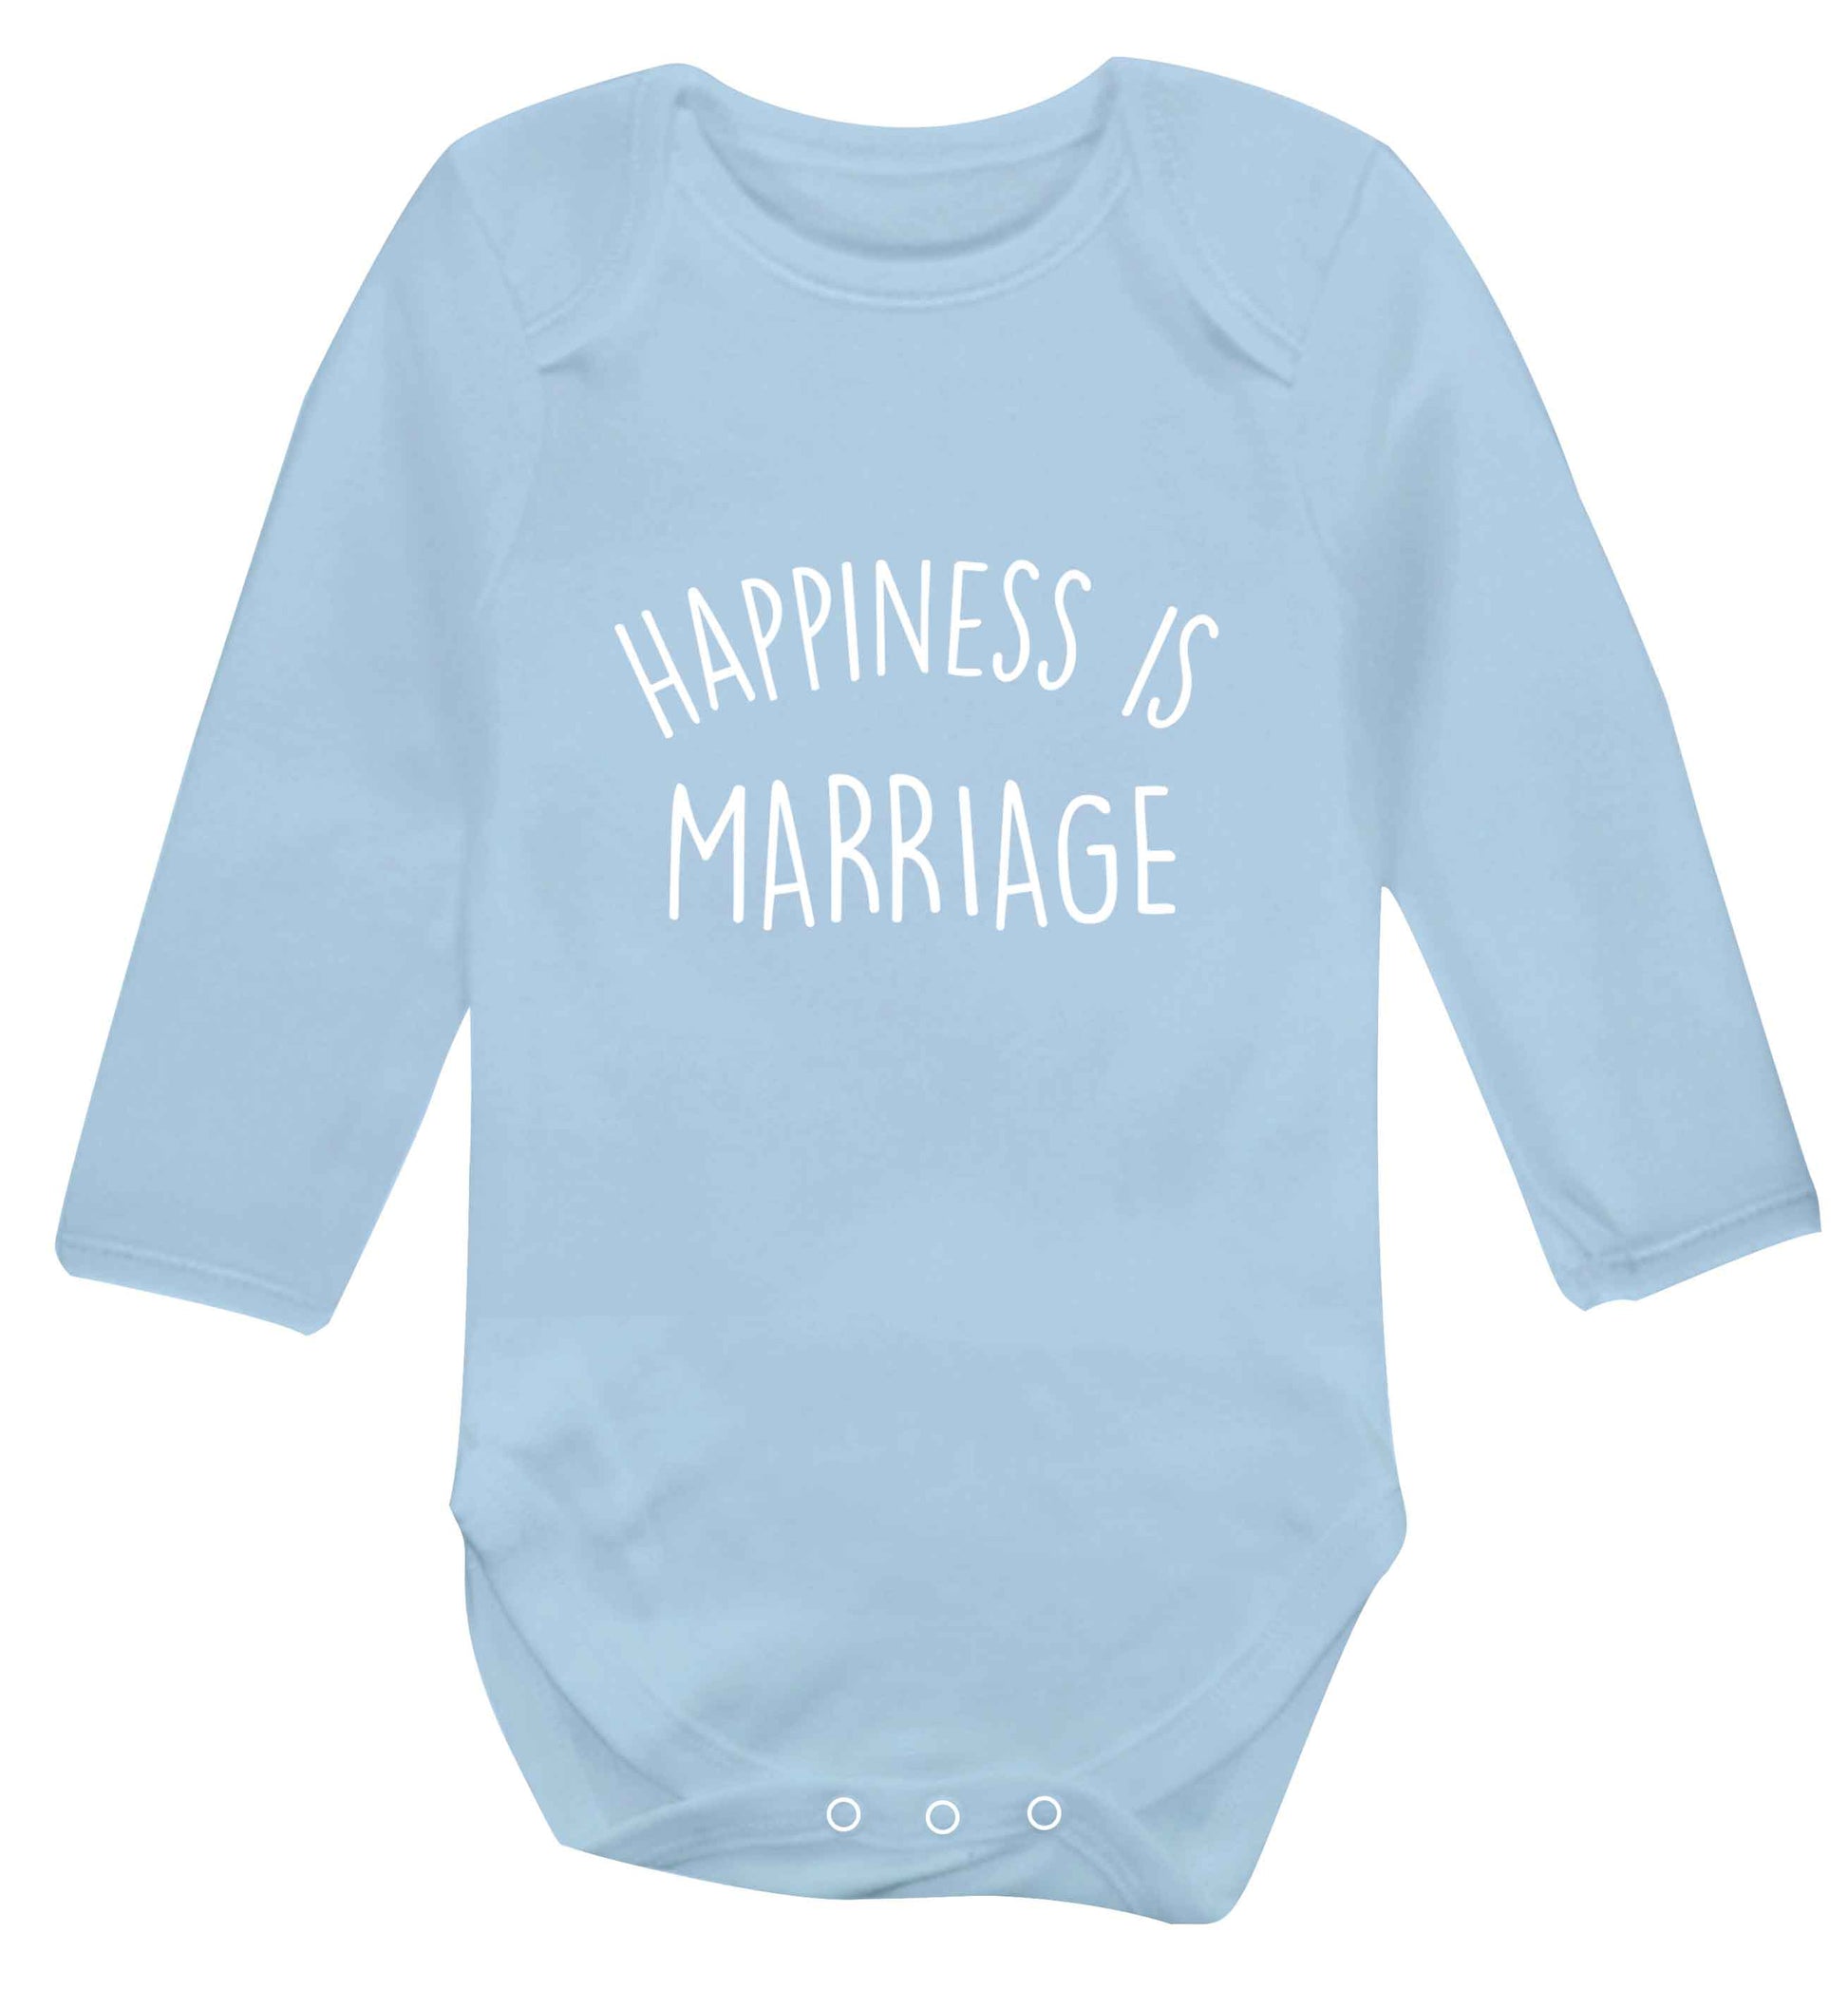 Happiness is marriage baby vest long sleeved pale blue 6-12 months